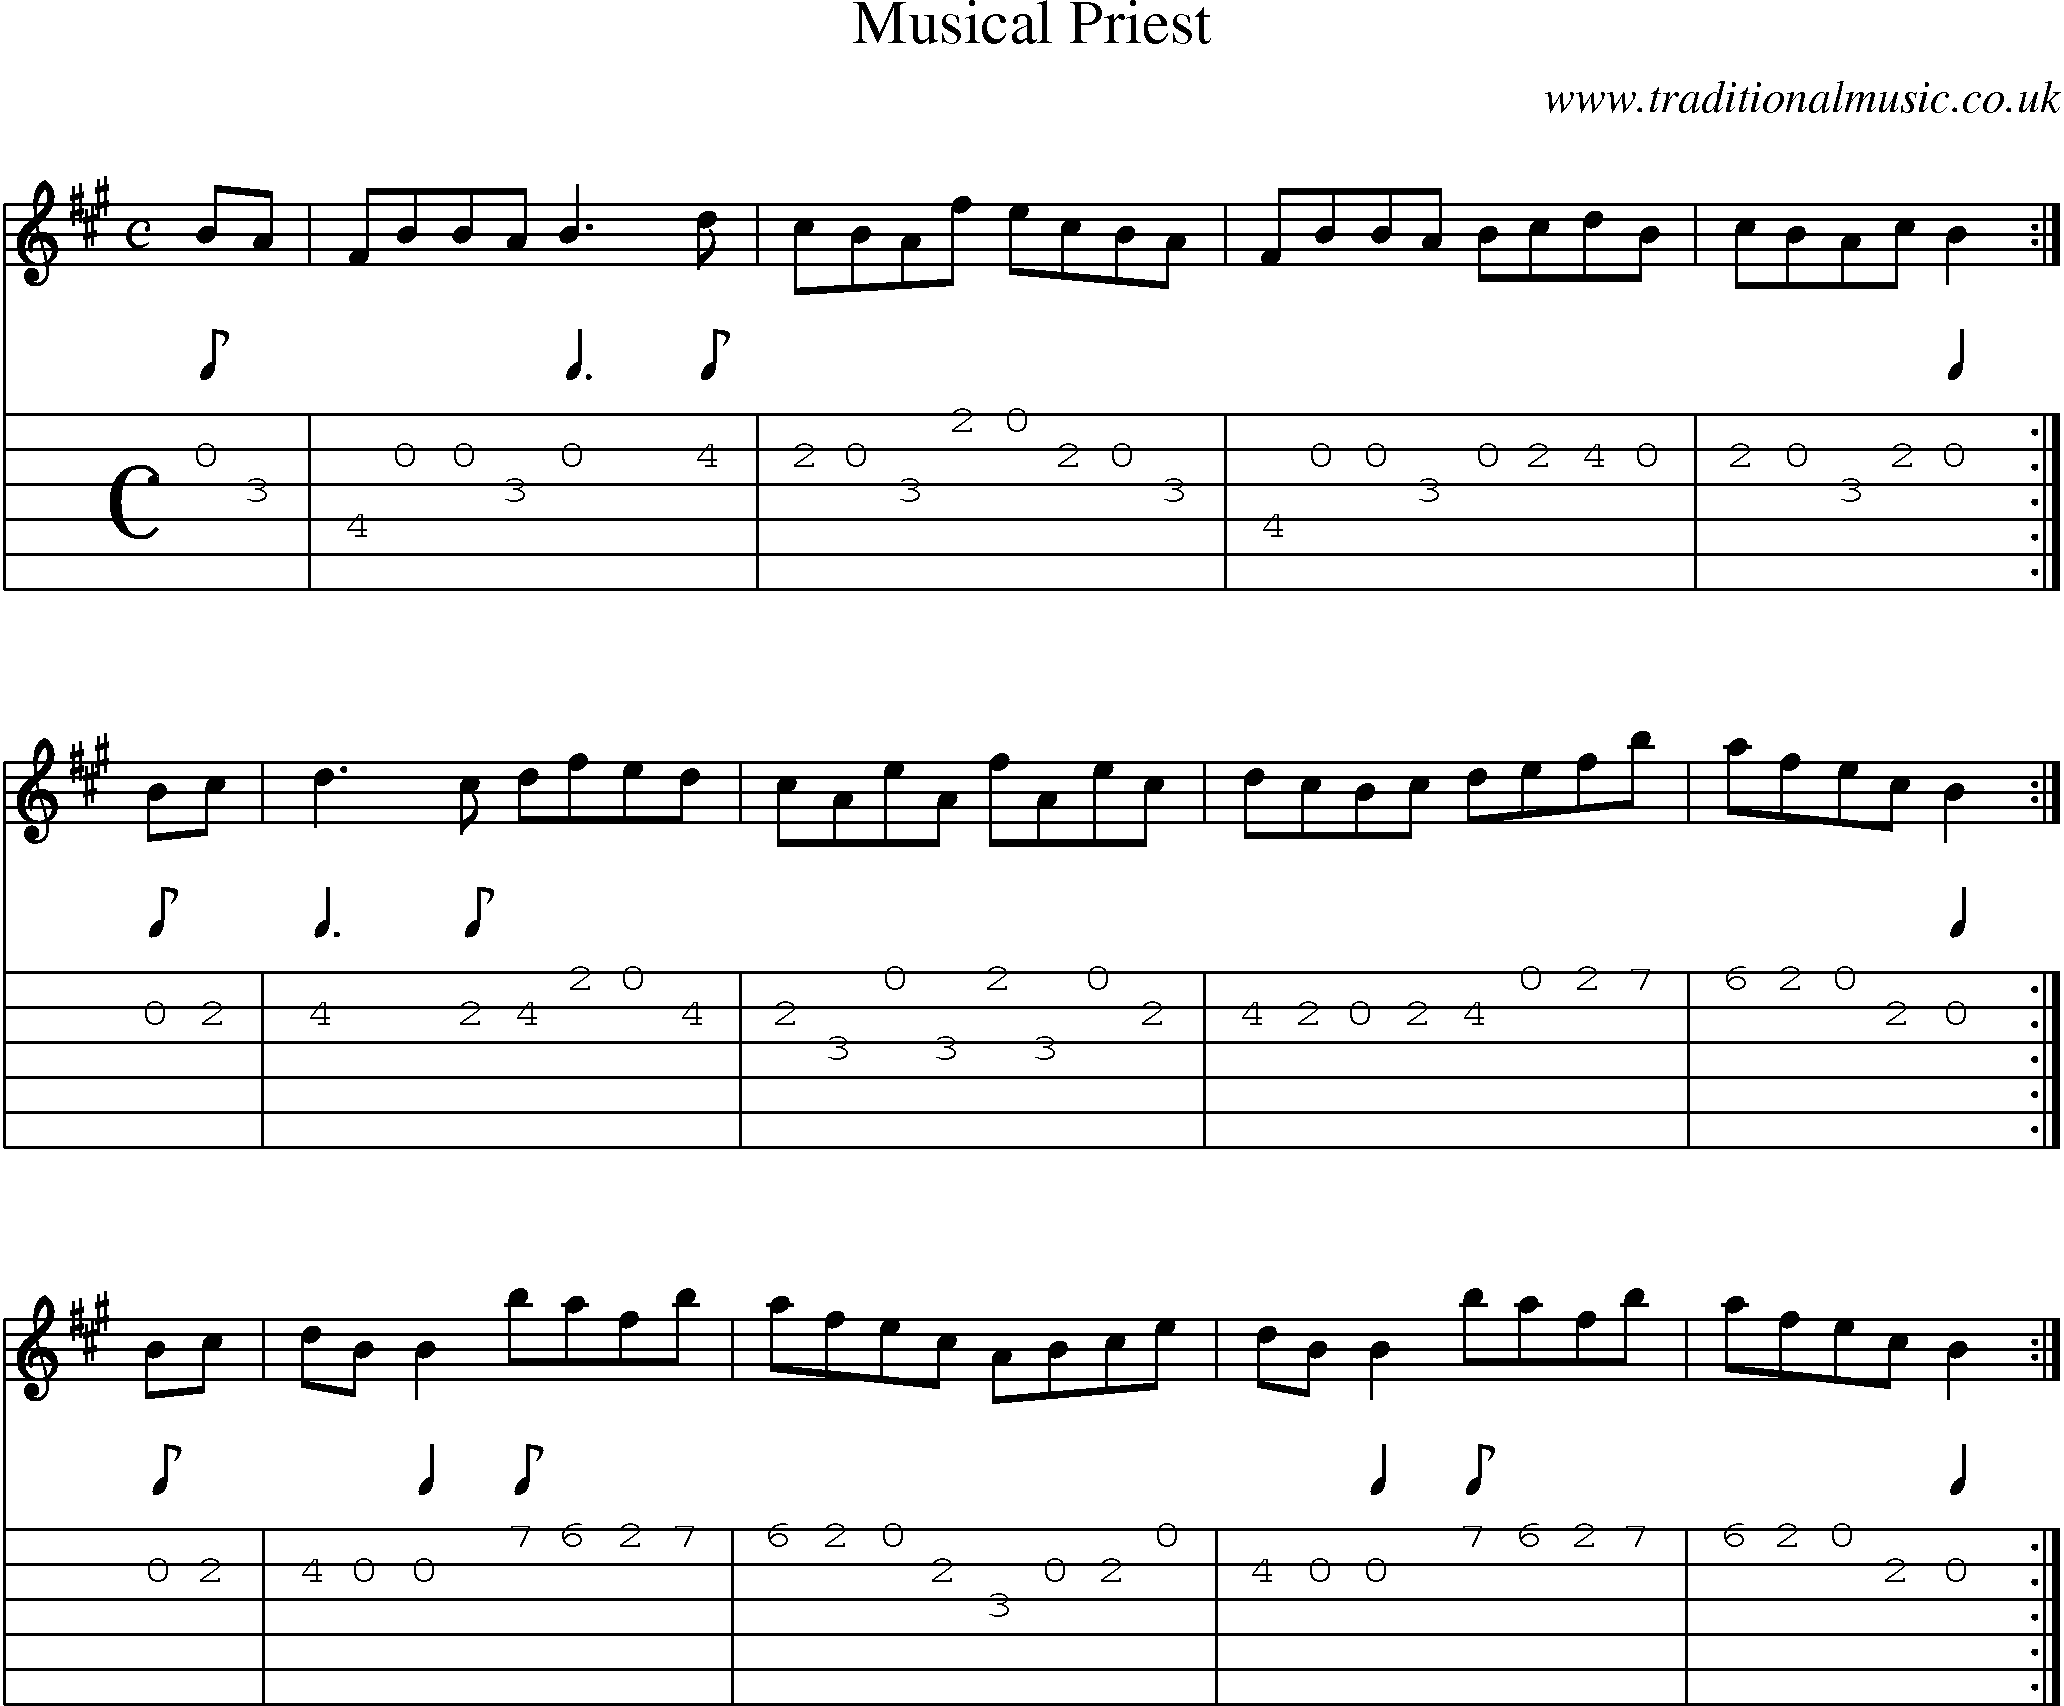 Music Score and Guitar Tabs for Musical Priest